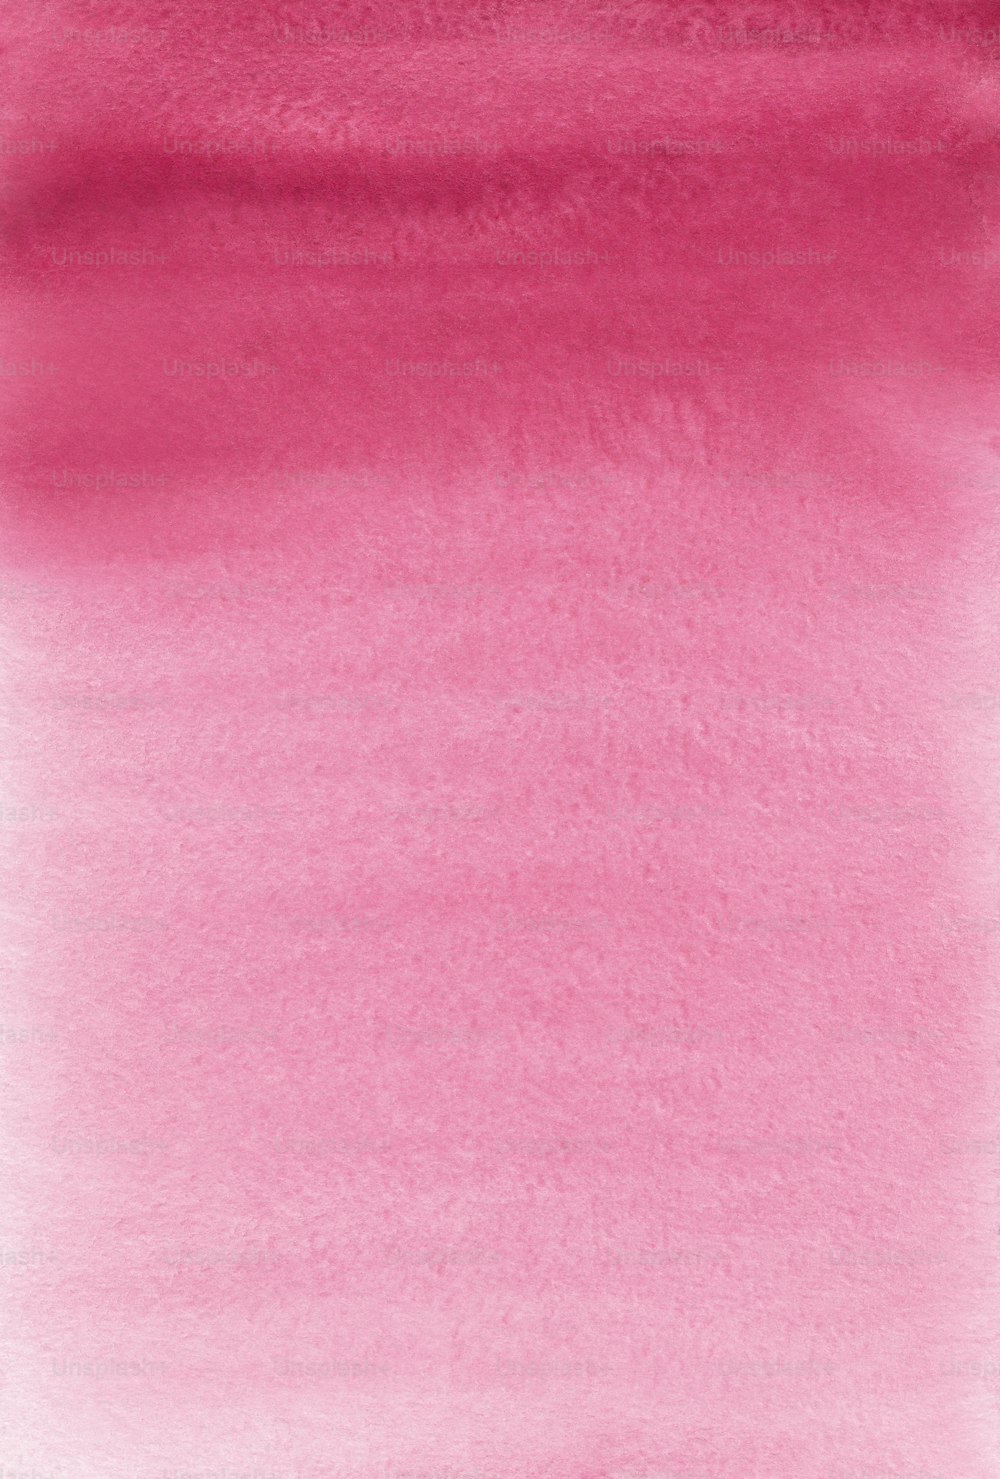 a pink watercolor background with a white border